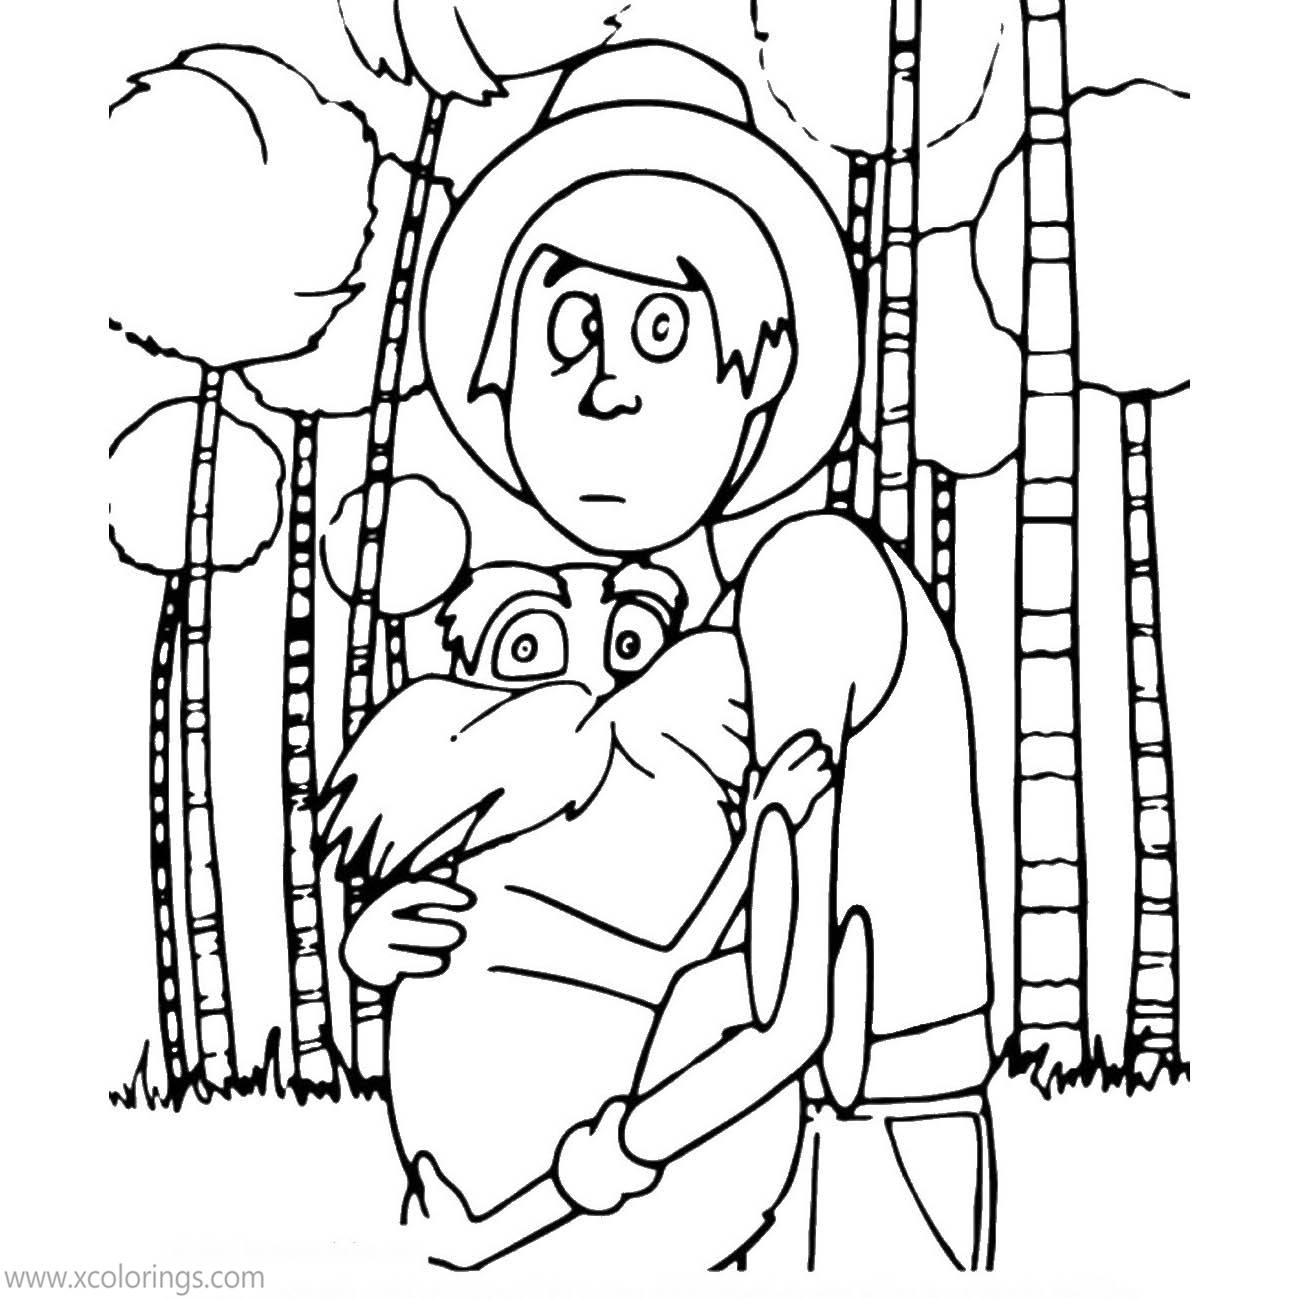 Free Lorax Coloring Pages Lorax and Once ler printable